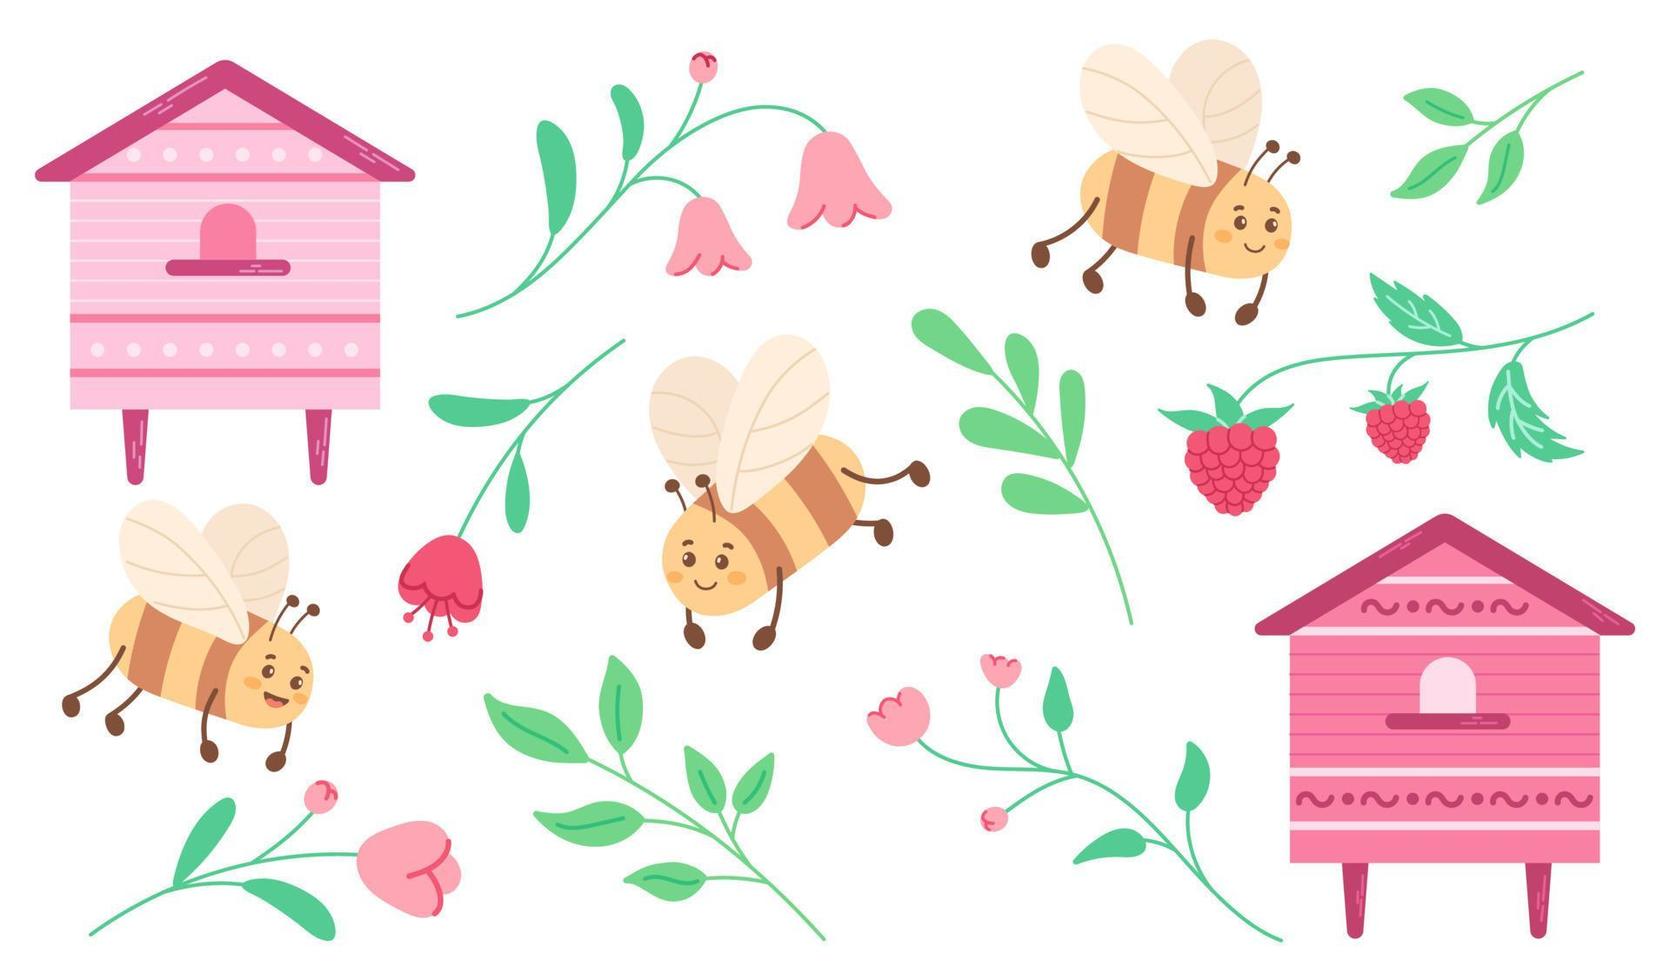 Cute honey bee funny illustration set. Cartoon vector happy spring insect character collection with hives, flowers and leaves.